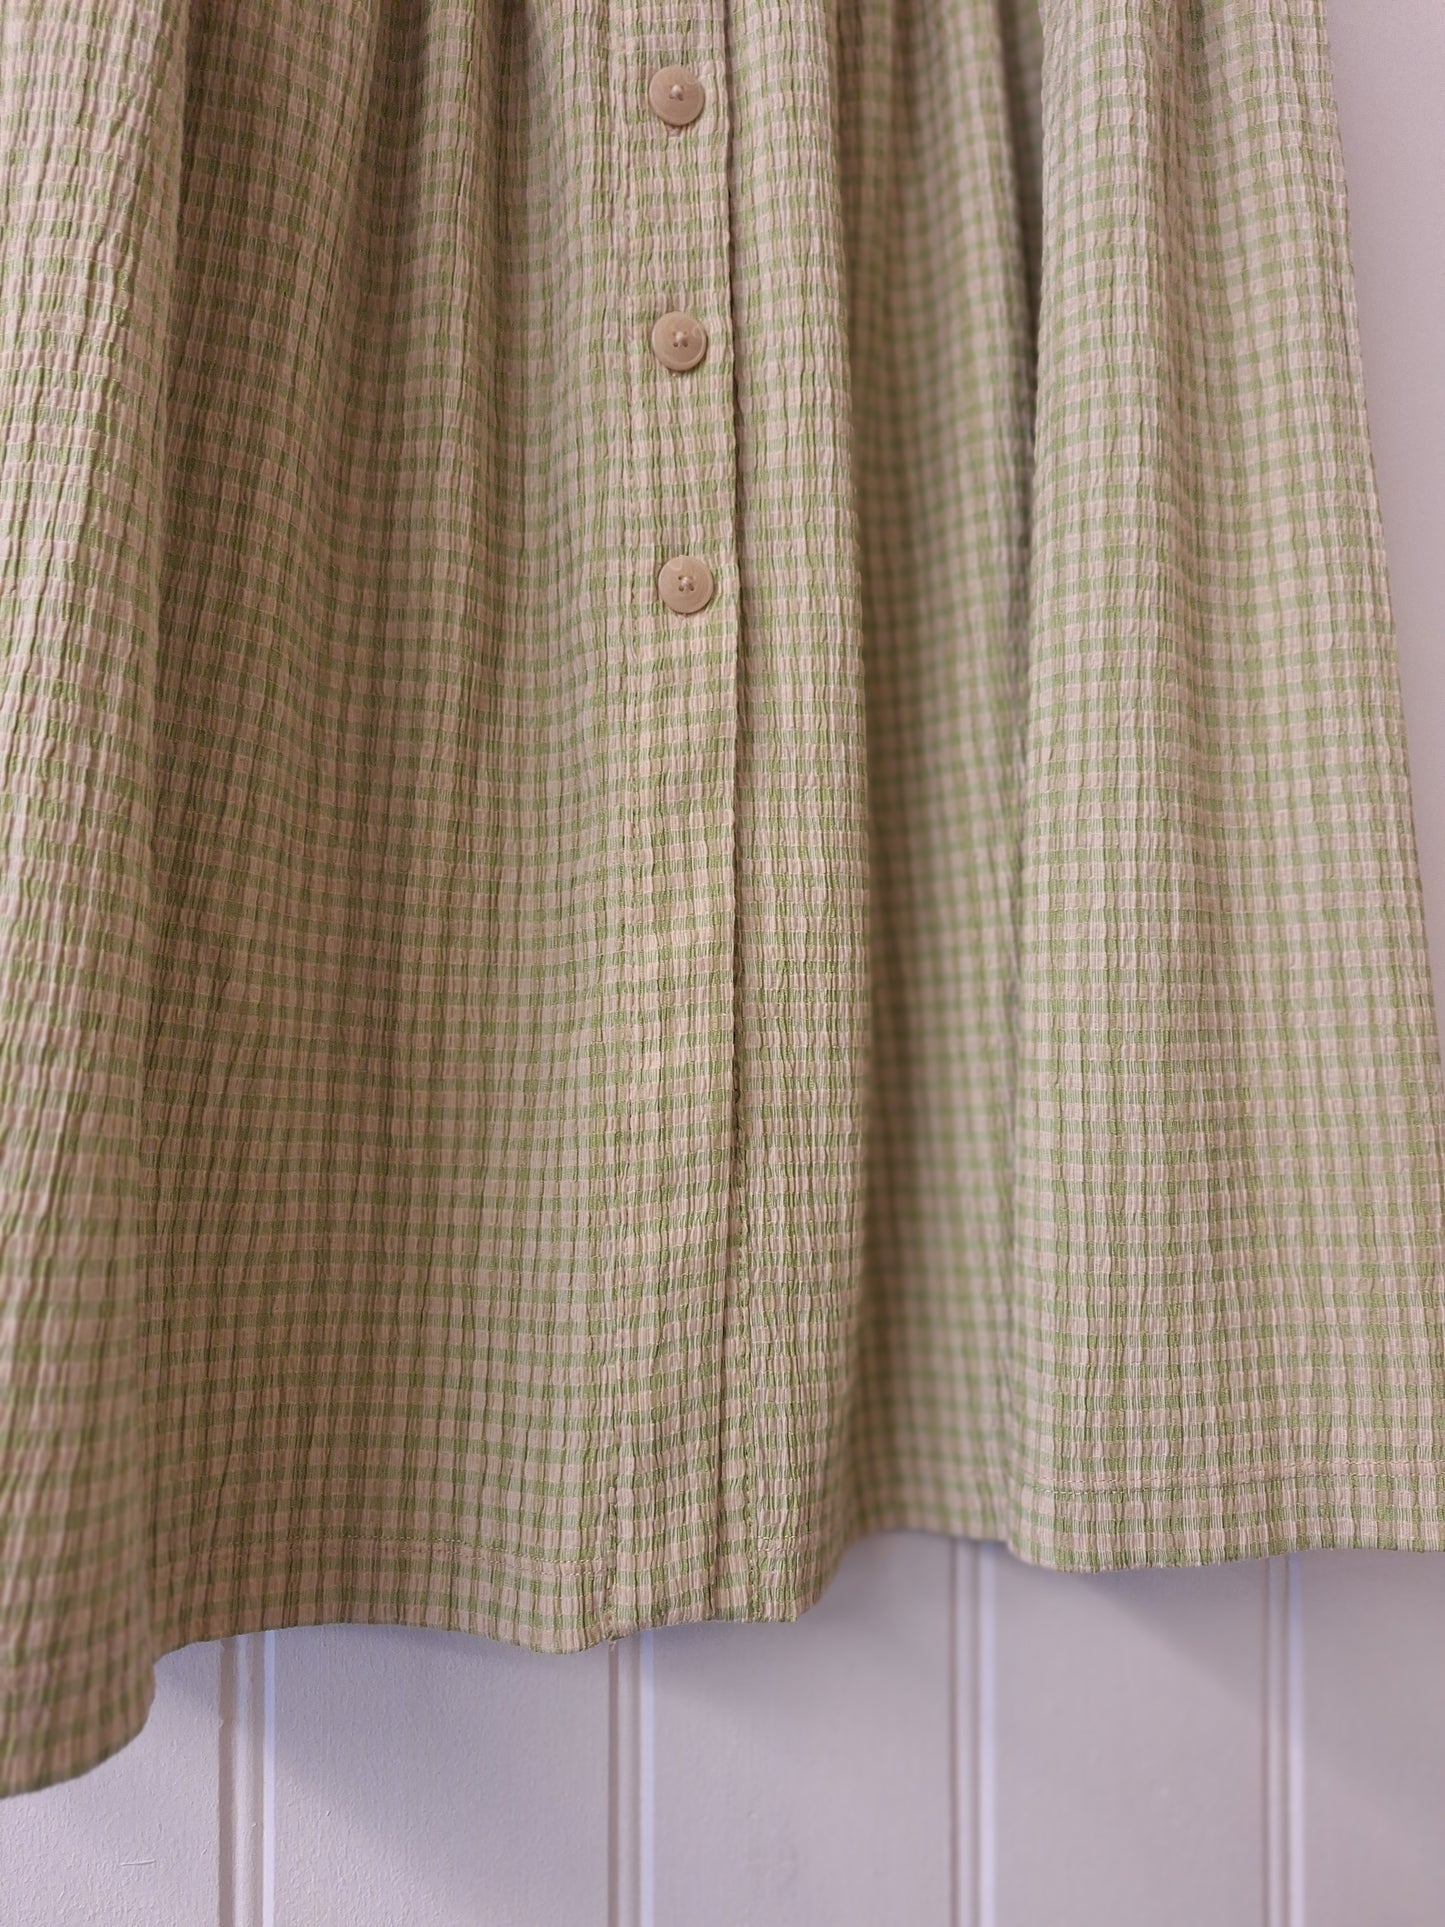 MNG green and taupe button through skirt L